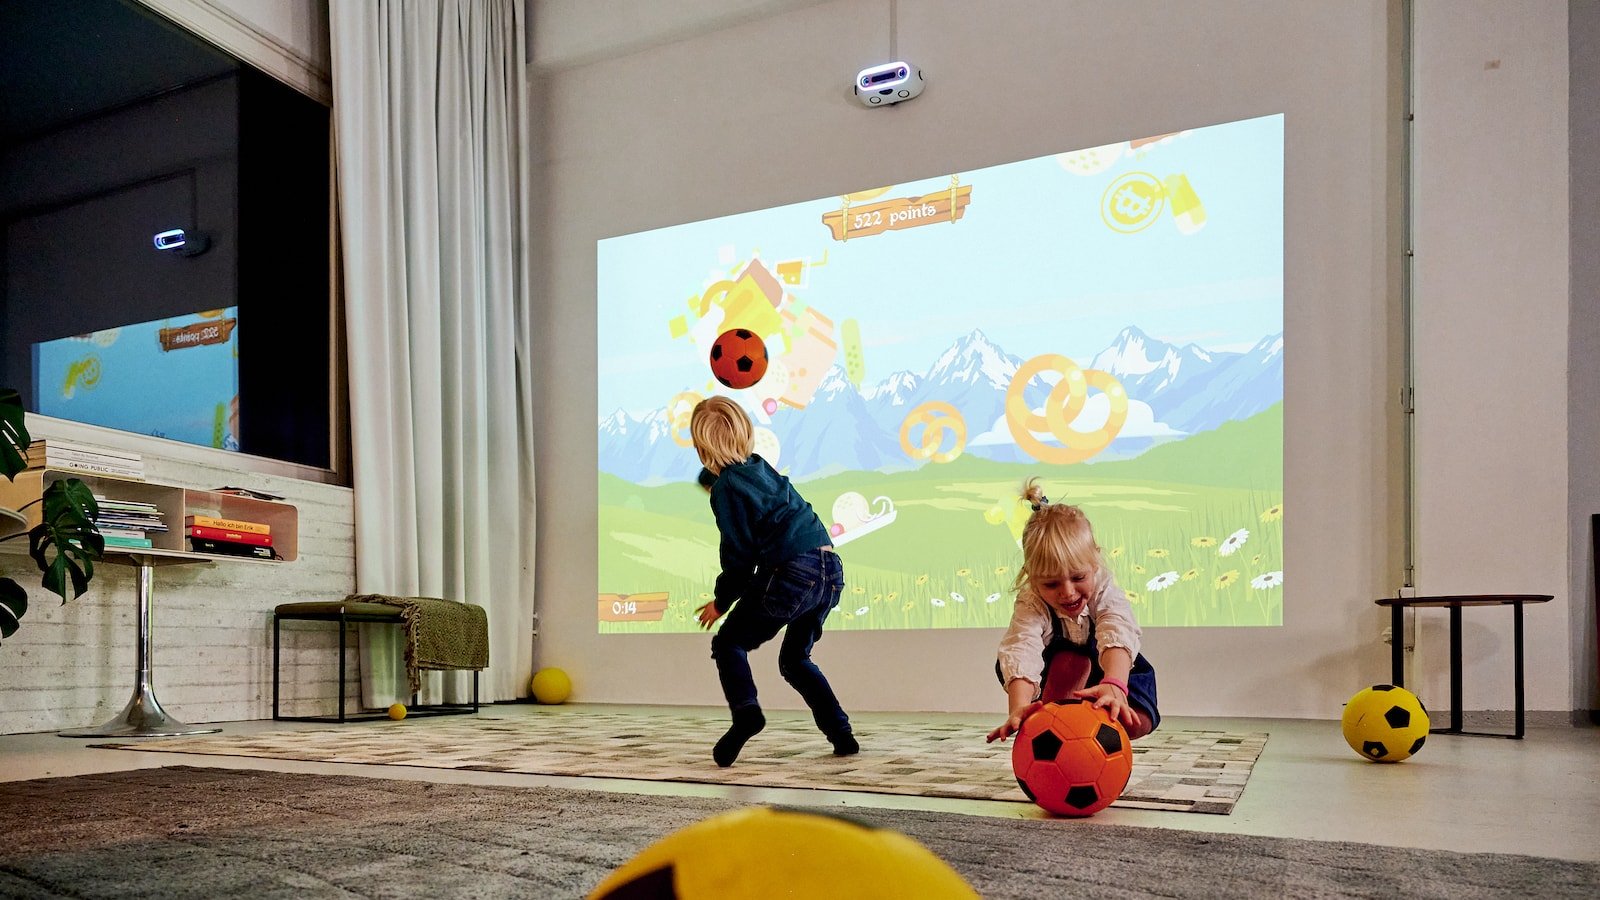 Limbic physical gaming console motivates the whole family to be active